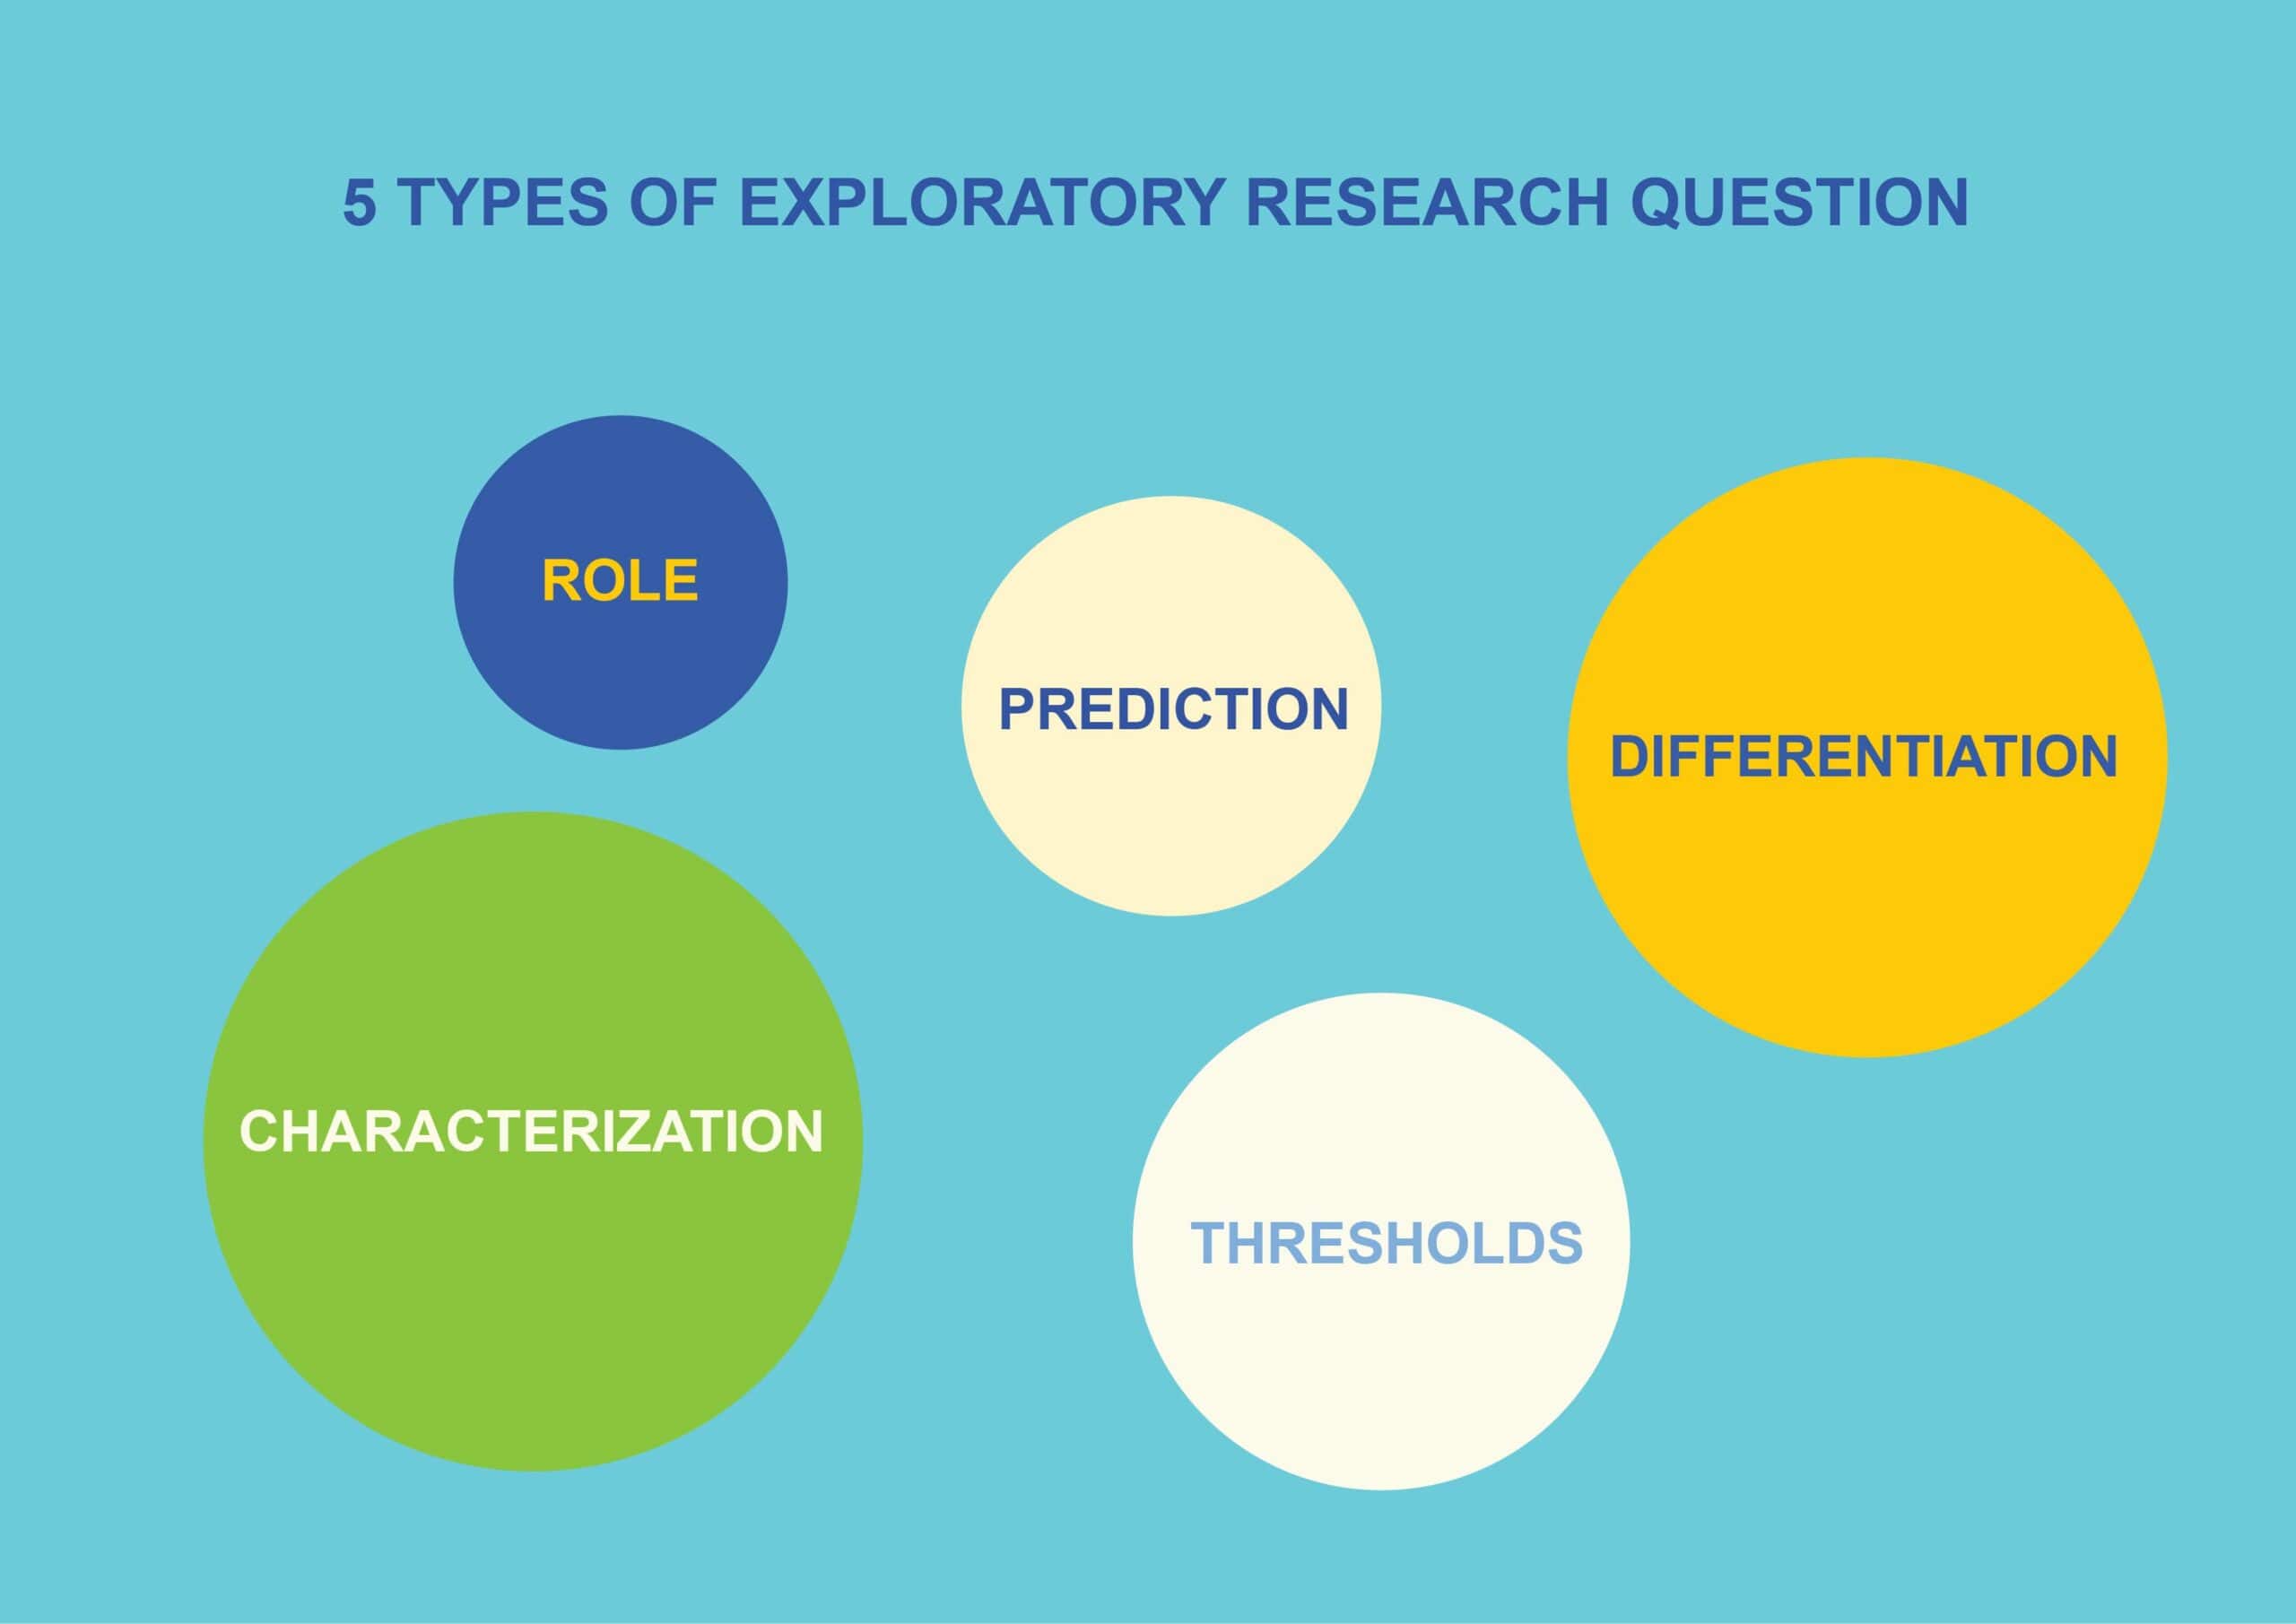 in exploratory research design which type of questions are studied